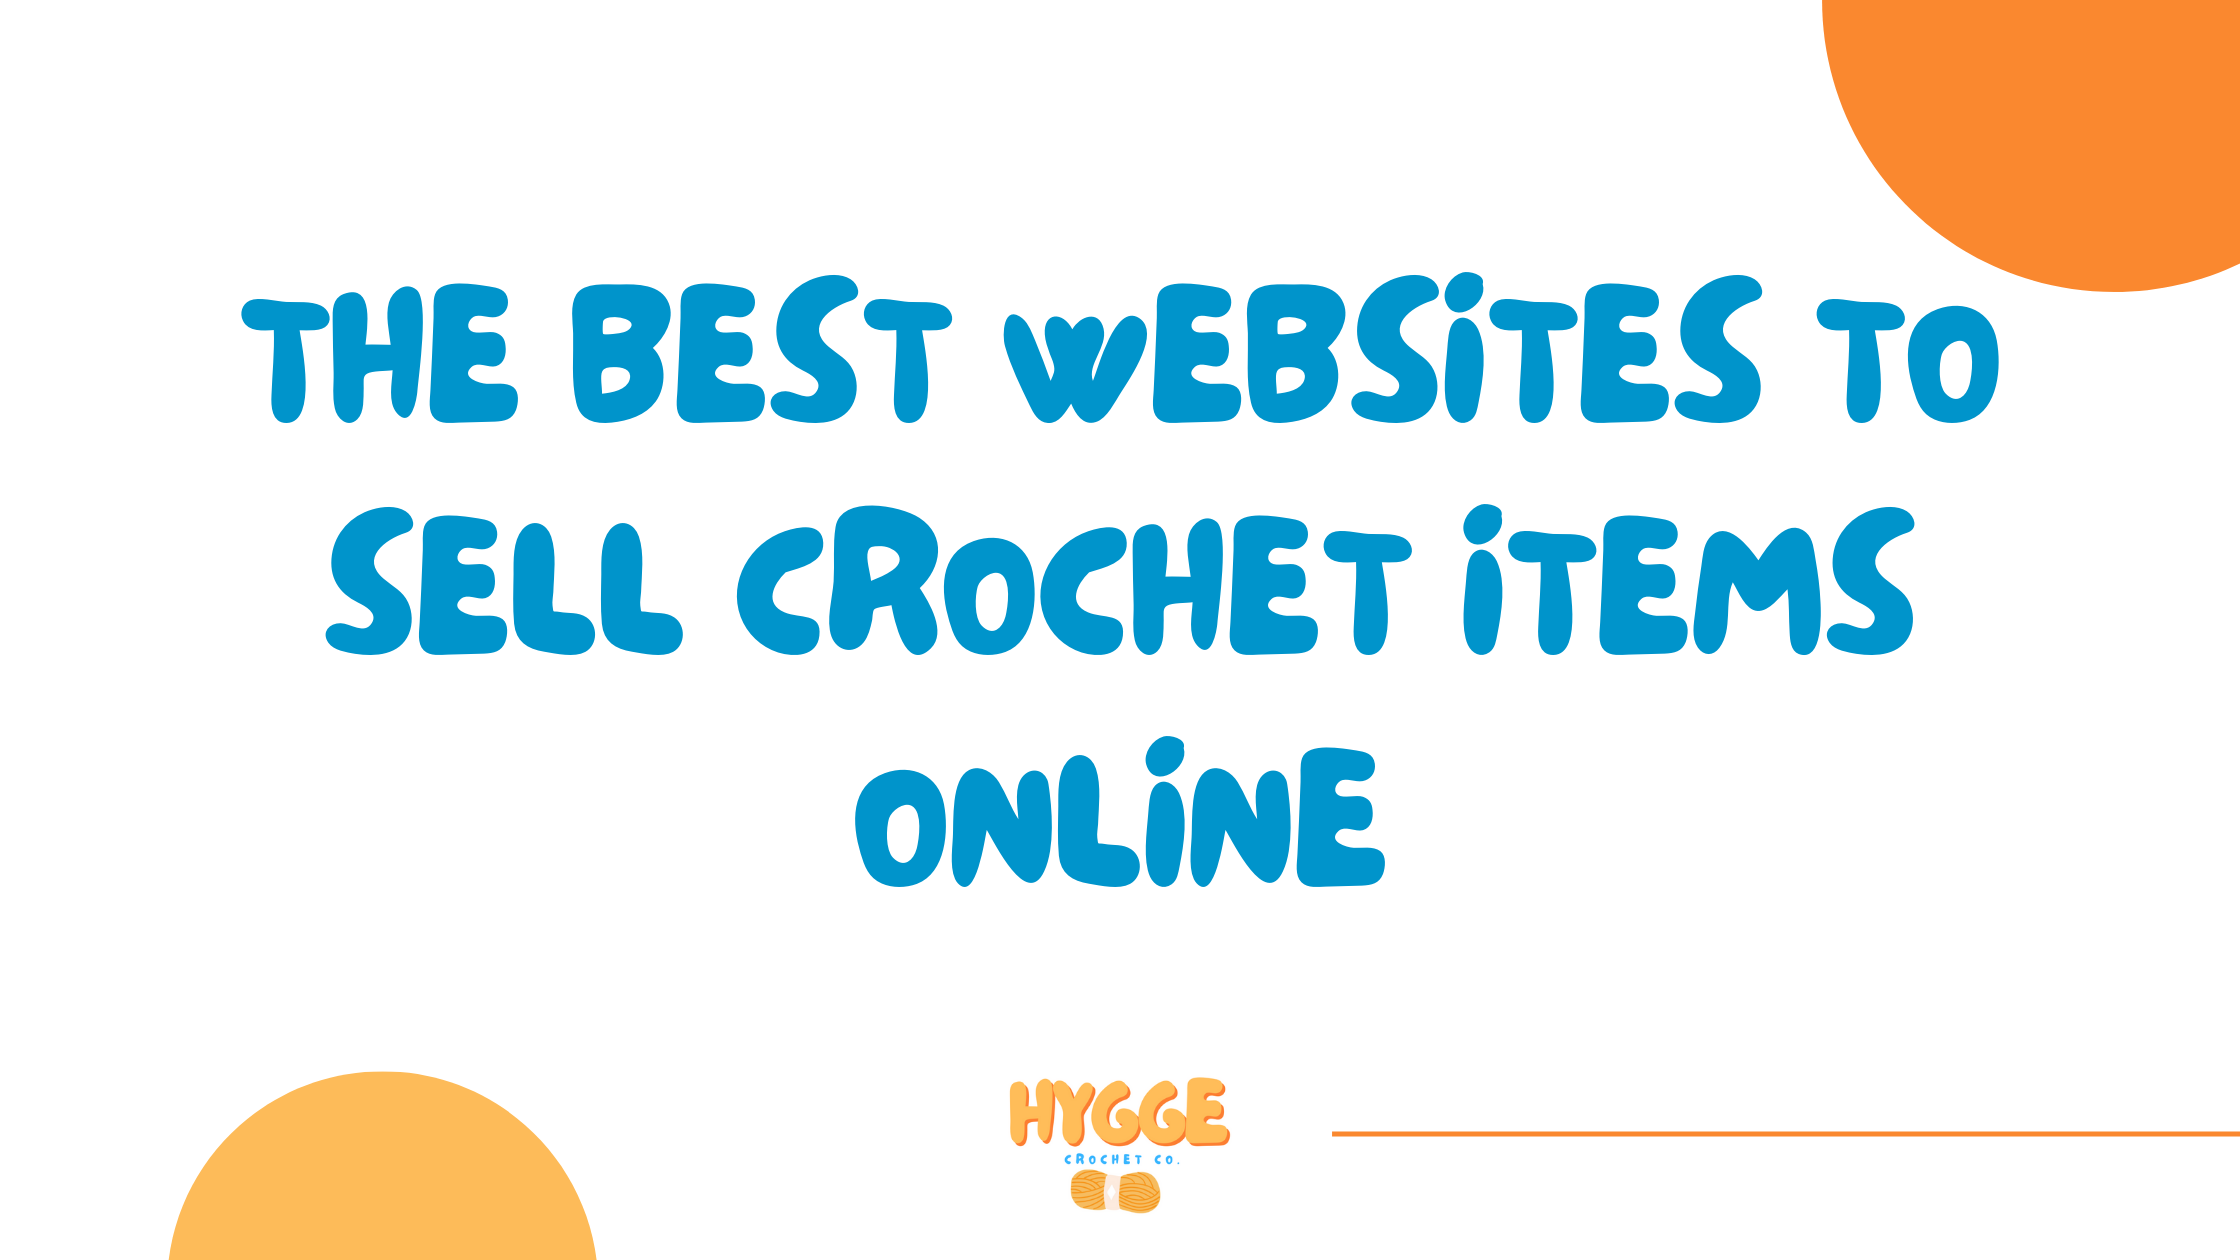 The Best Websites to Sell Crochet Items Online